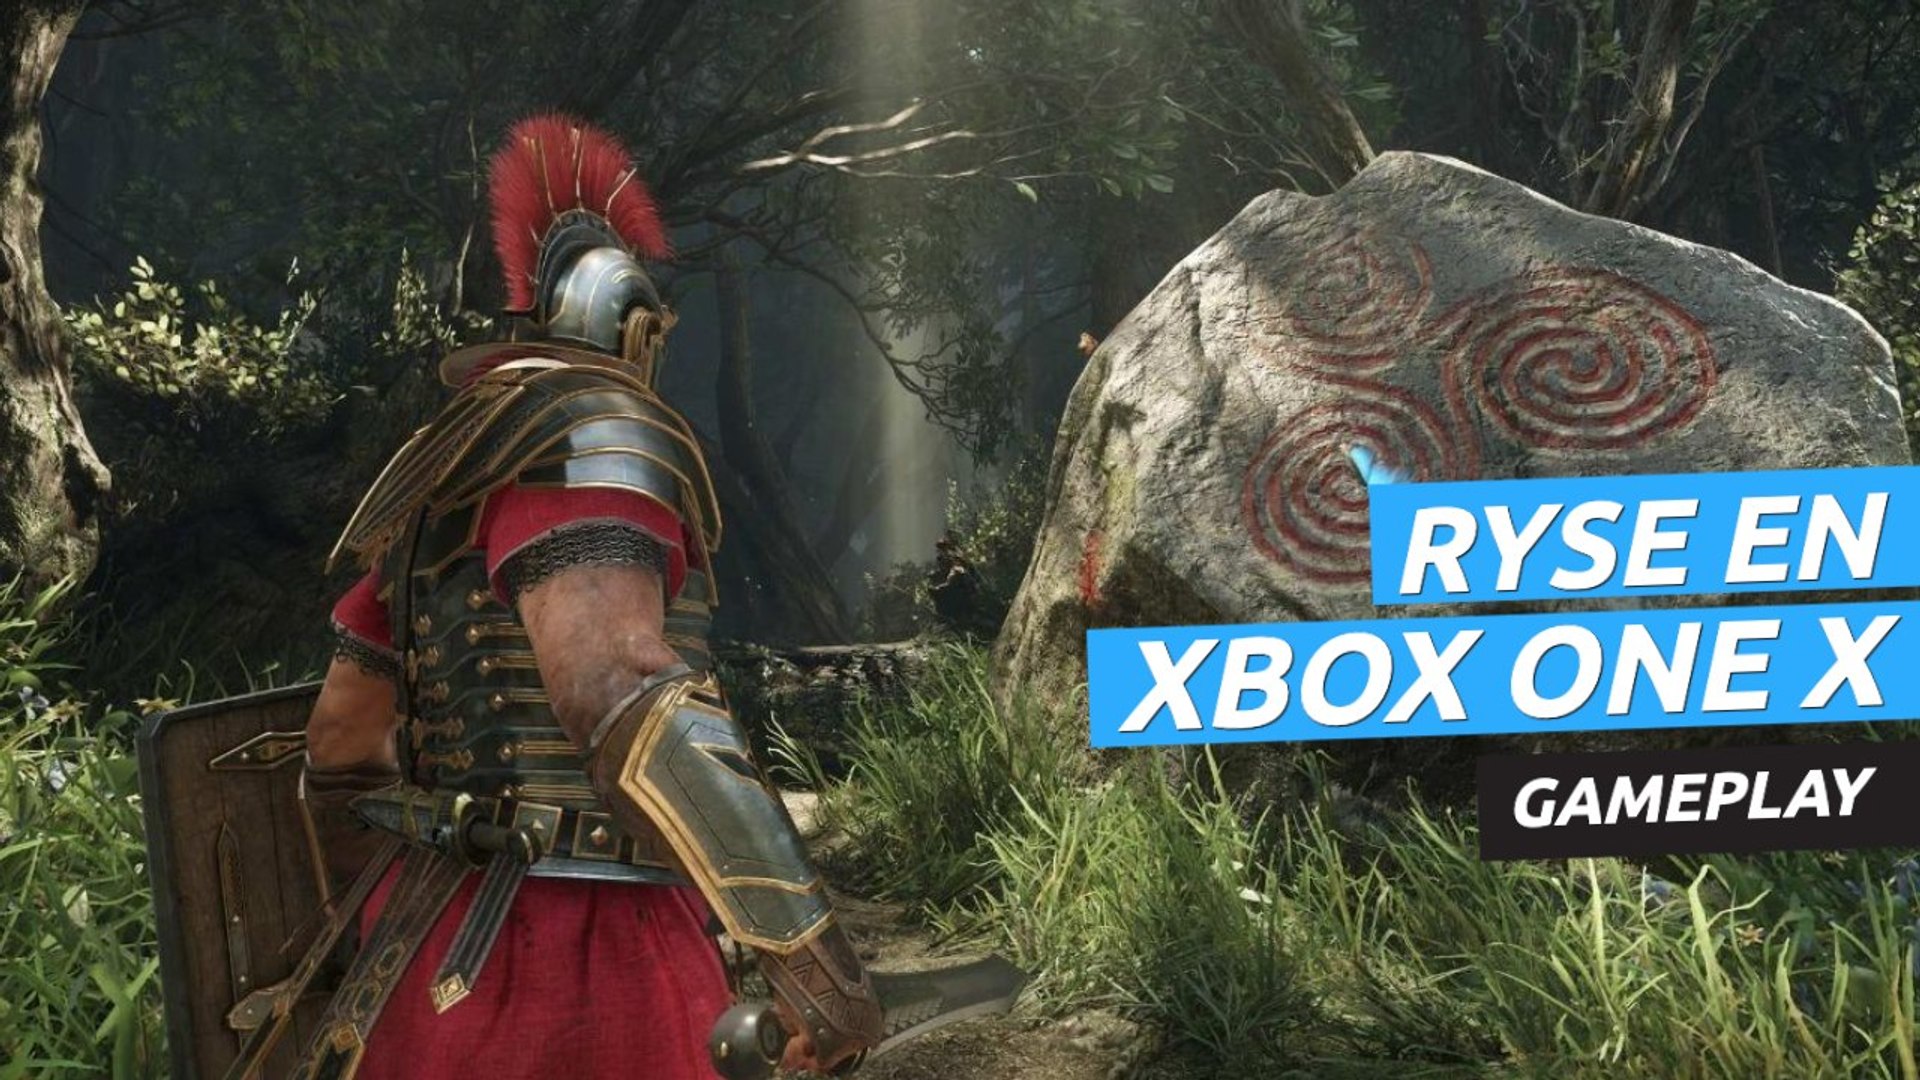 Gameplay de Ryse Son of Rome en Xbox One X - Vídeo Dailymotion